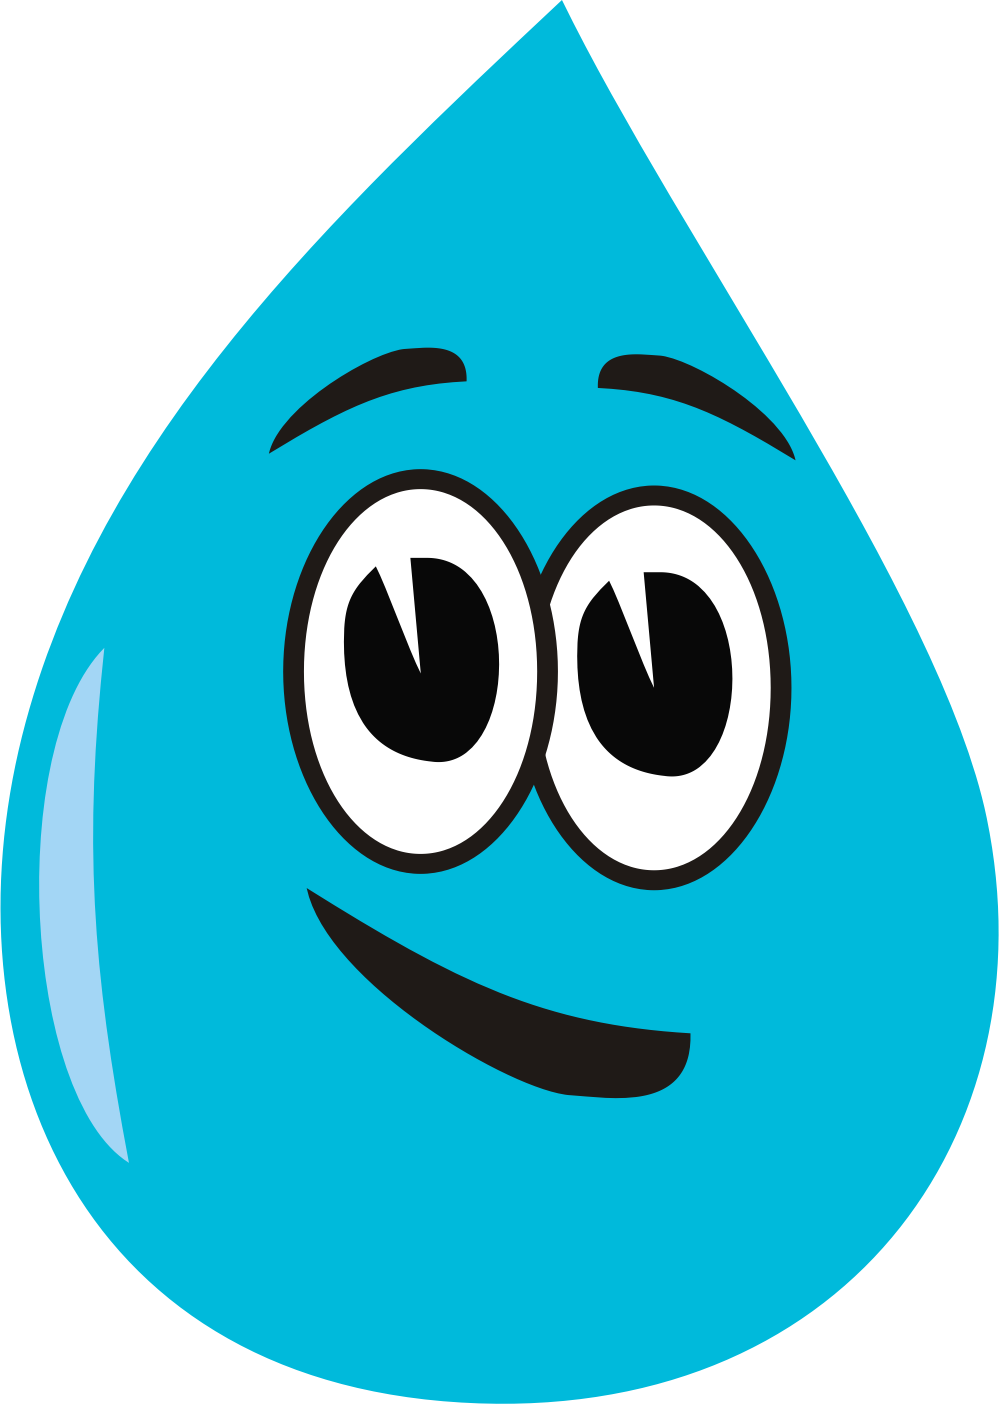 Download Happy Water Droplet vector files image - Free stock photo - Public Domain photo - CC0 Images